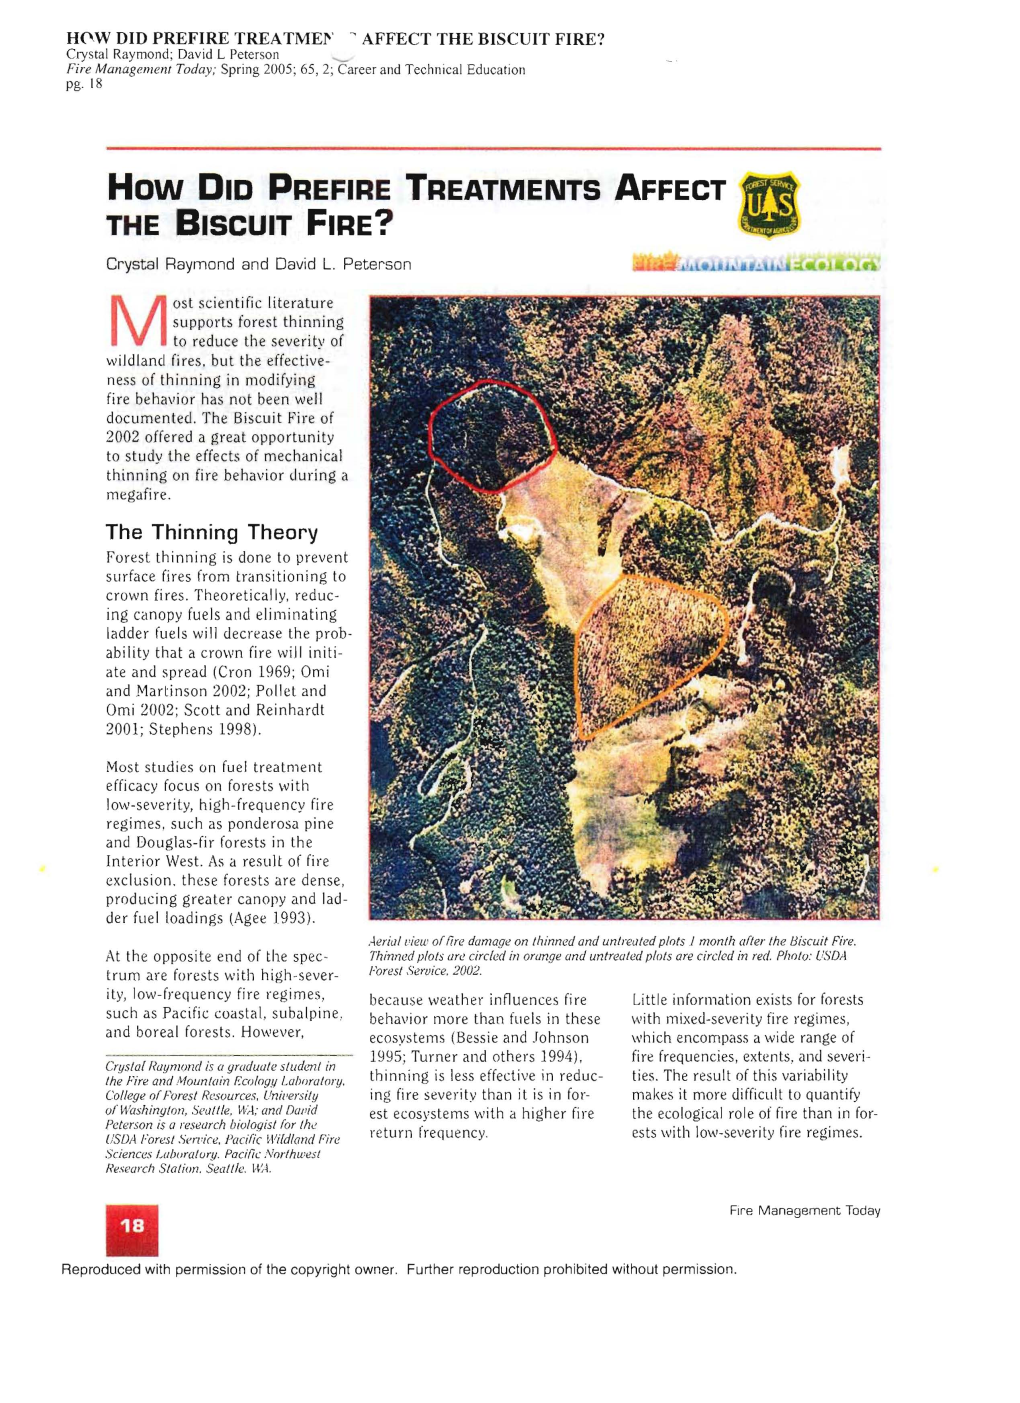 How DID PREFIRE TREATMENTS AFFECT the BISCUIT FIRE?